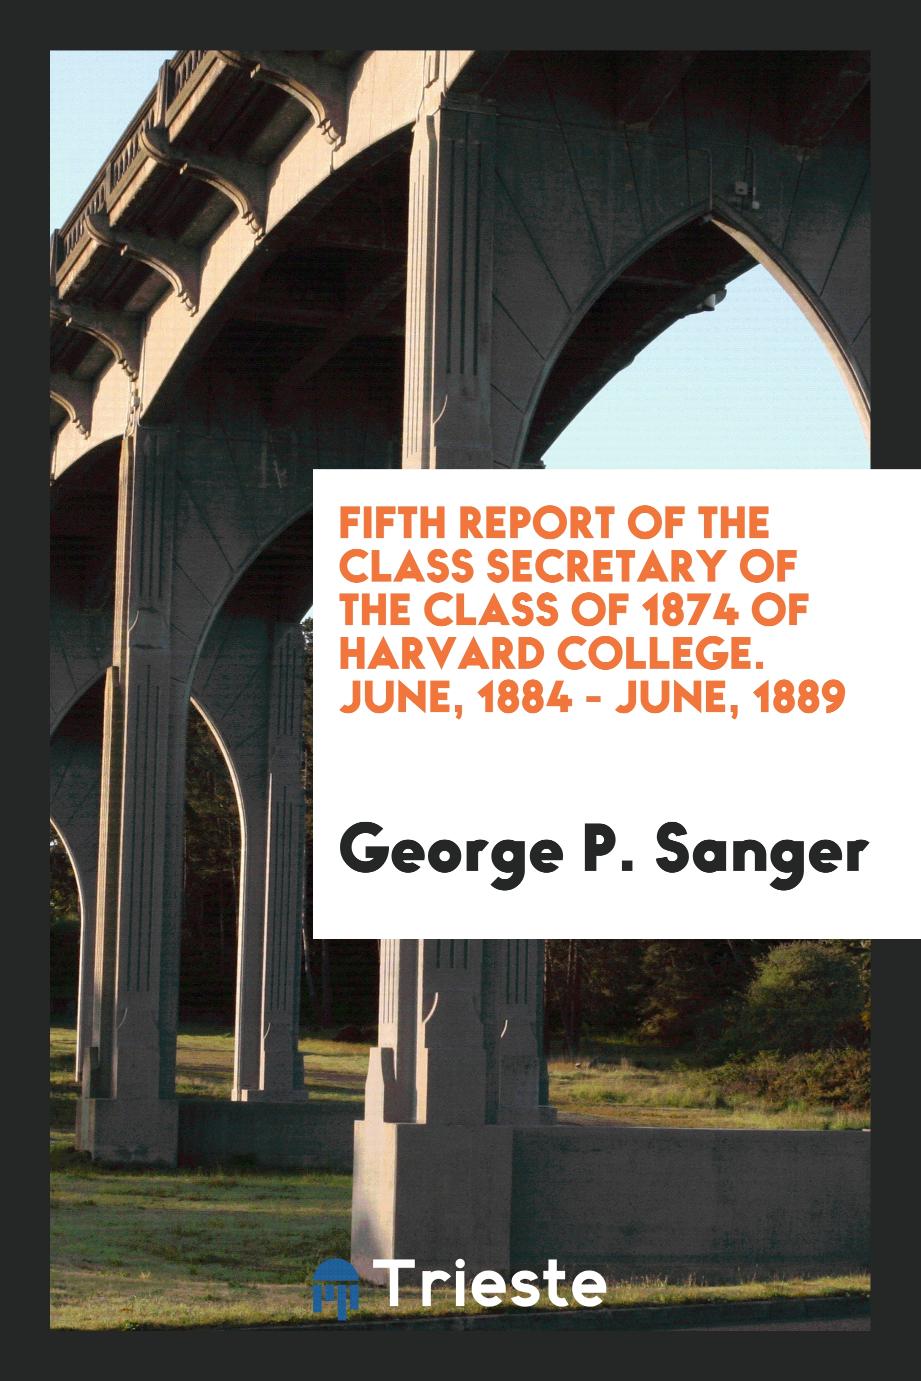 Fifth report of the class secretary of the class of 1874 of Harvard college. June, 1884 - June, 1889